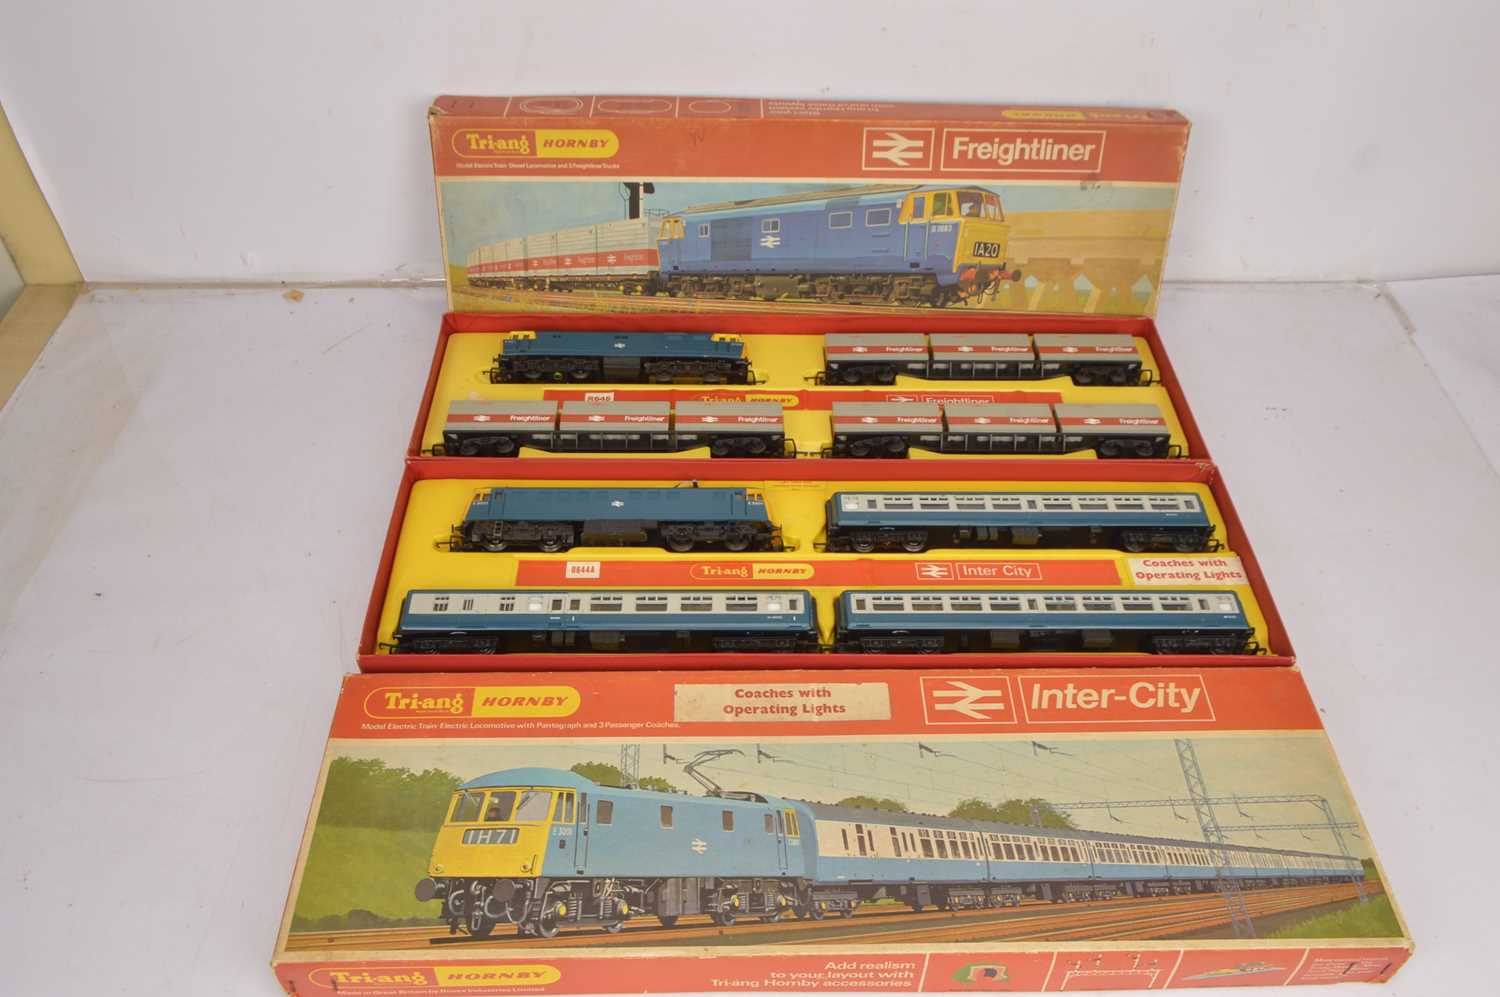 Lot 30 - Tri-ang-Hornby 00 Gauge Freightliner and Inter-City Train Packs and quantity of System 6 Track and Points and Automatic Train Control